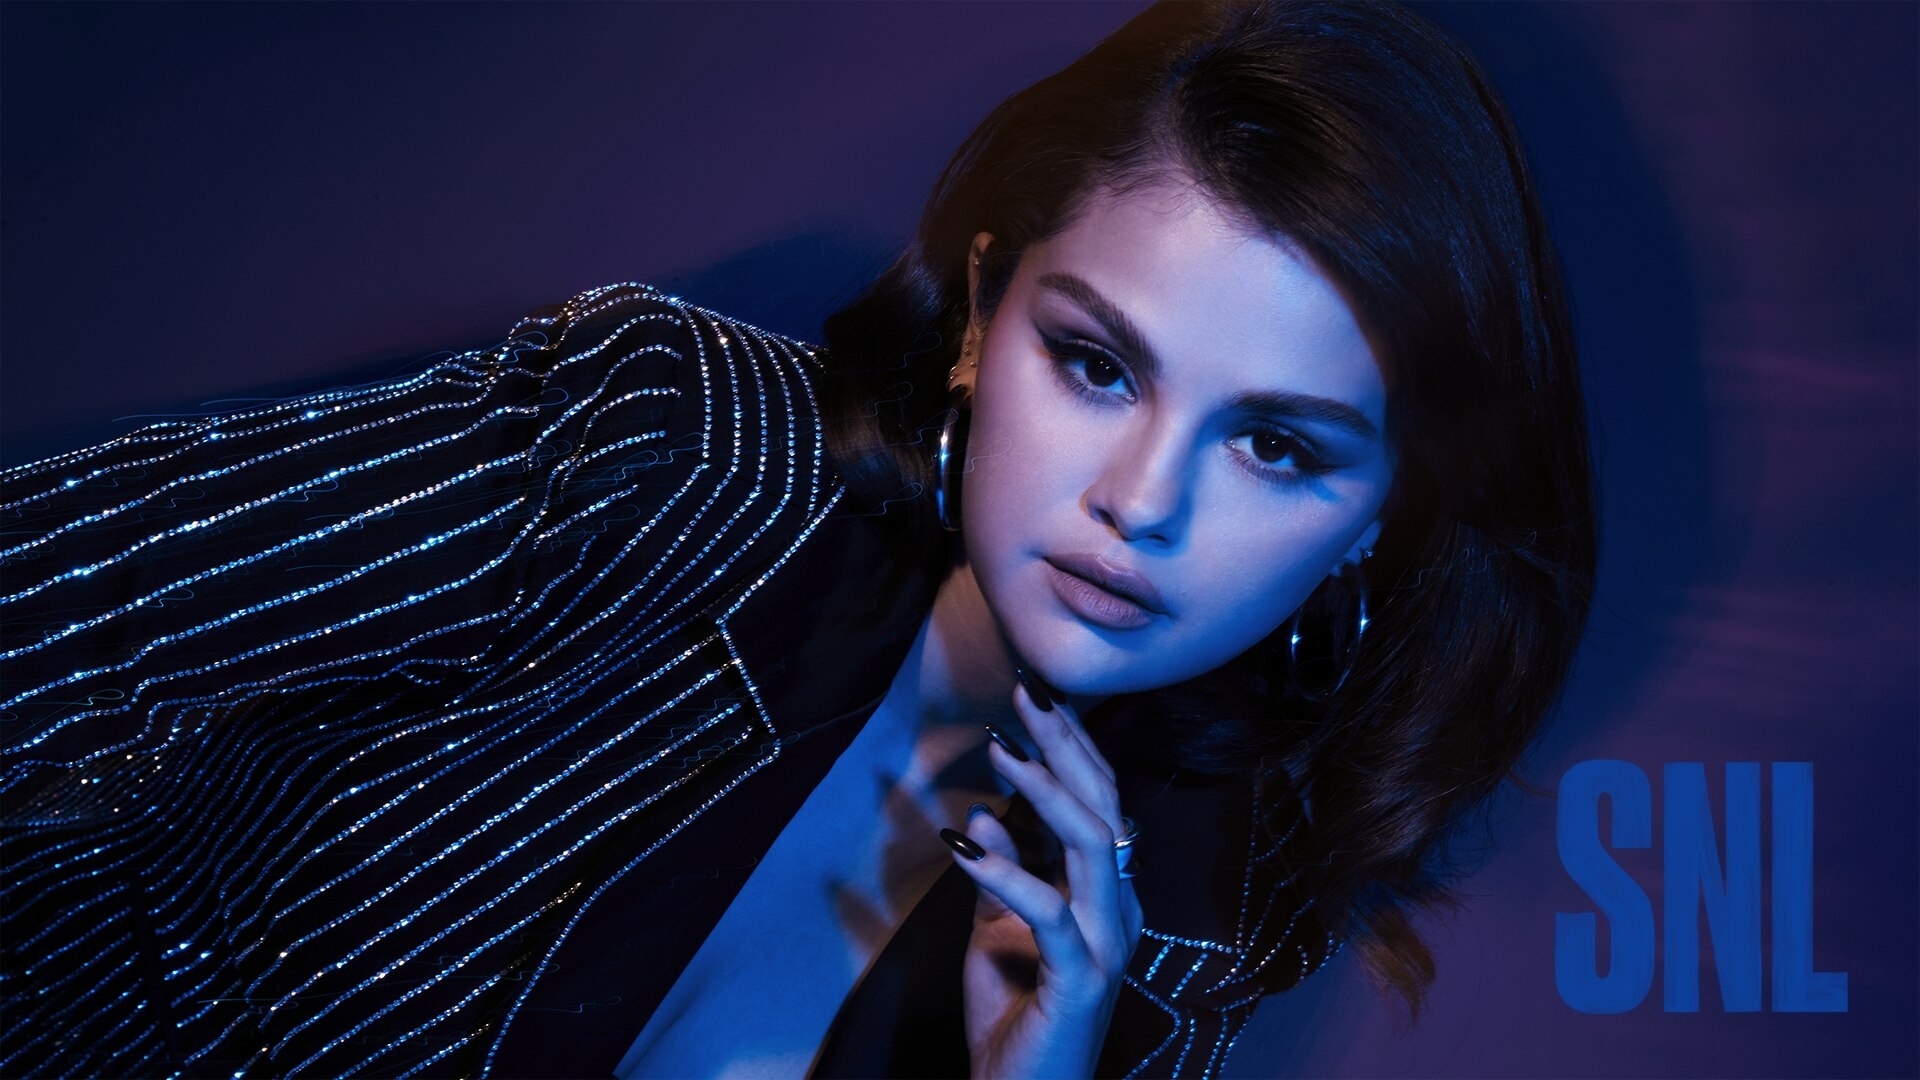 Beautiful Selena Gomez Hd Wallpapers All Hd Wallpapers Hot Sex Picture